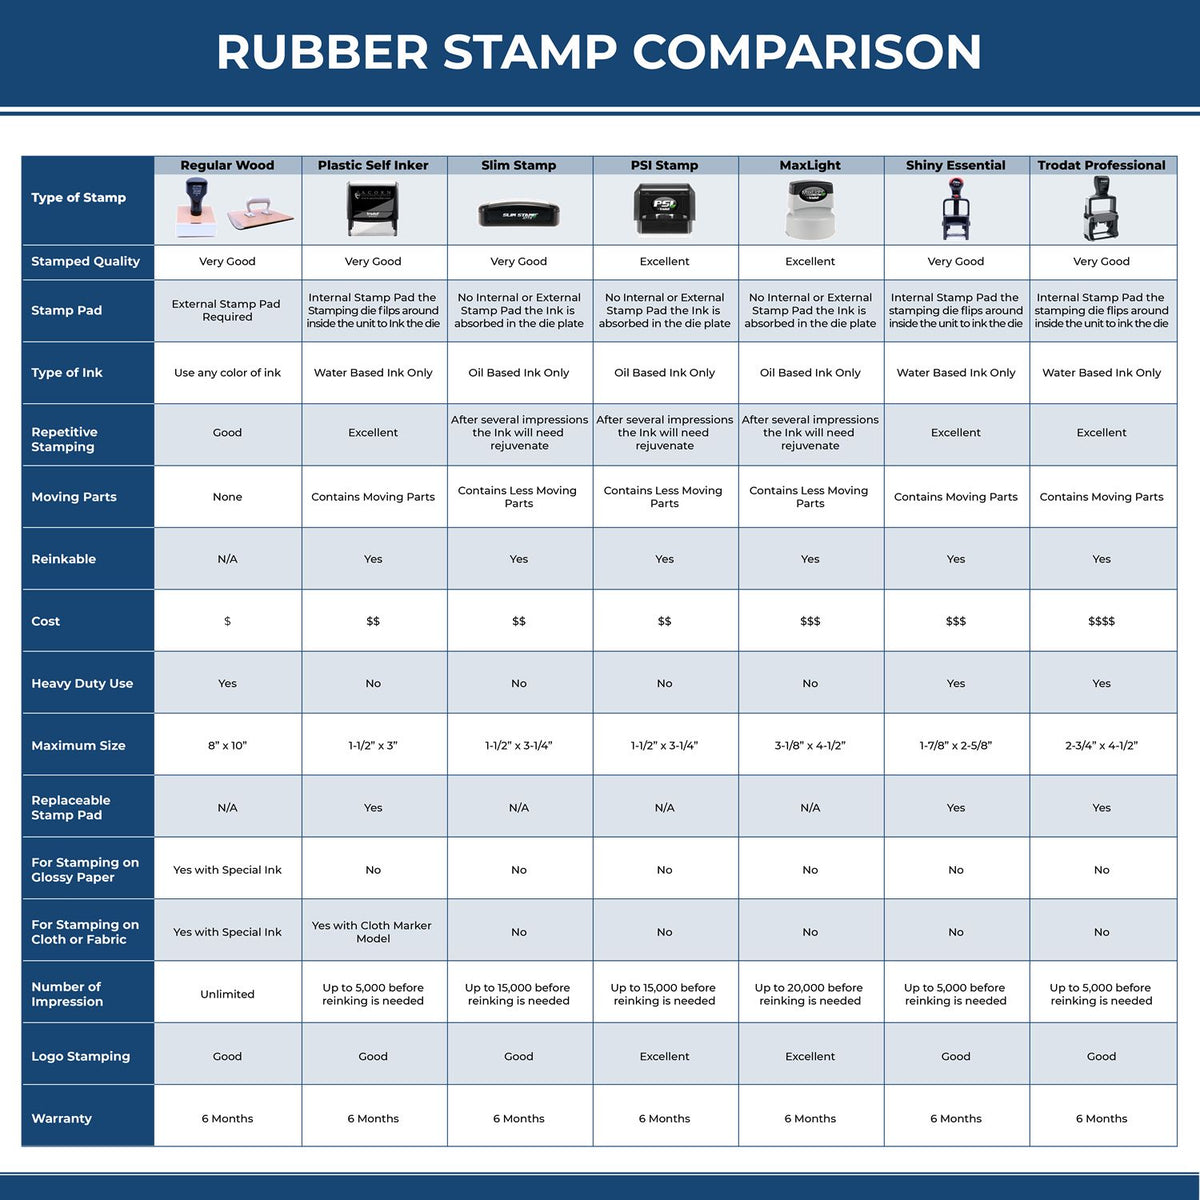 Large Self-Inking Curly Copy Stamp 4871S Rubber Stamp Comparison